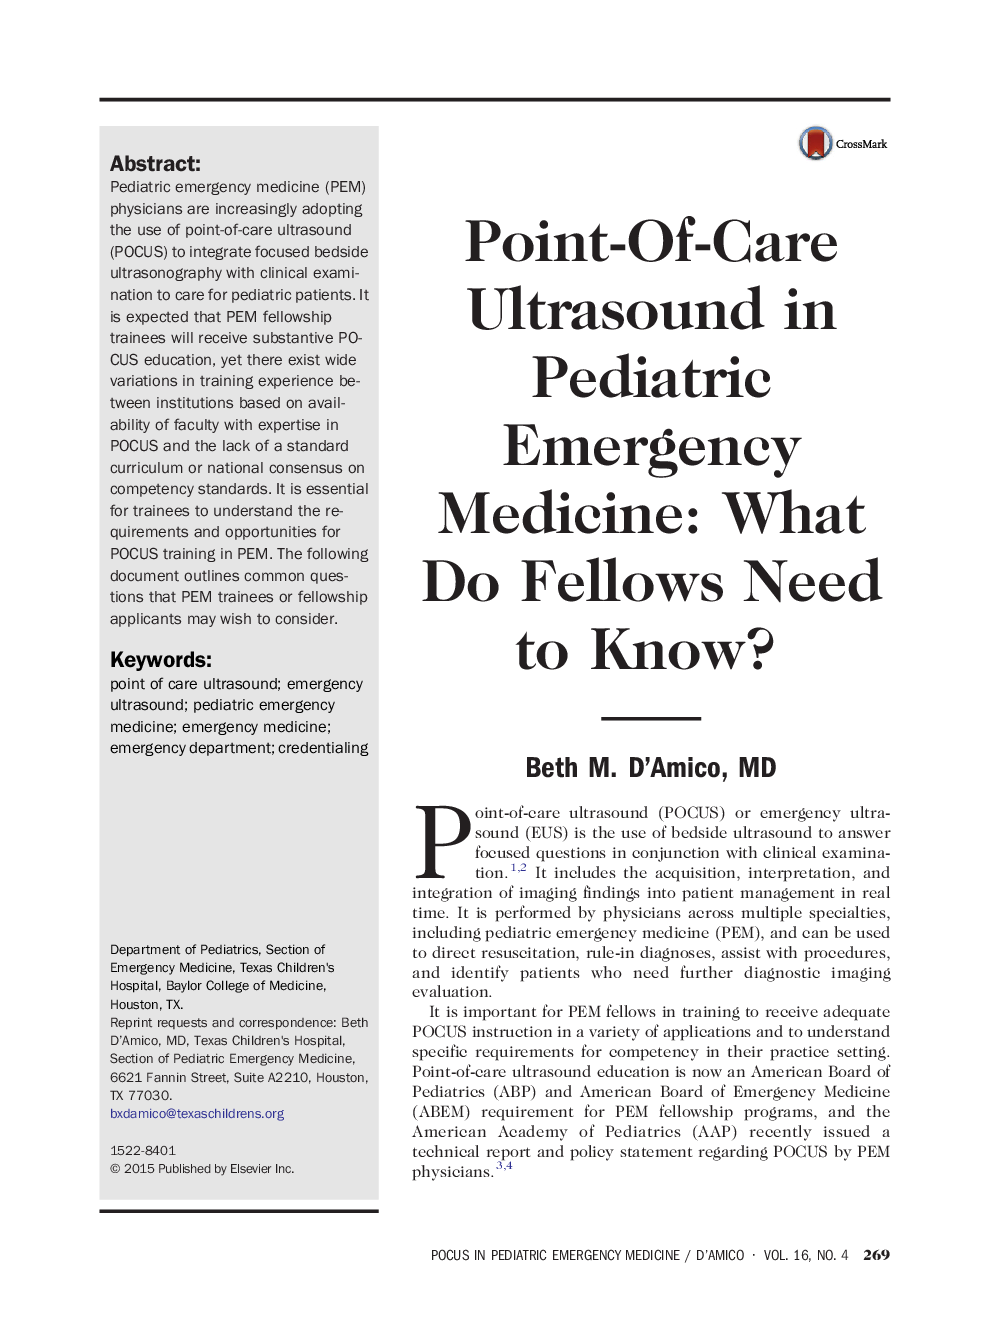 Point-Of-Care Ultrasound in Pediatric Emergency Medicine: What Do Fellows Need to Know? 